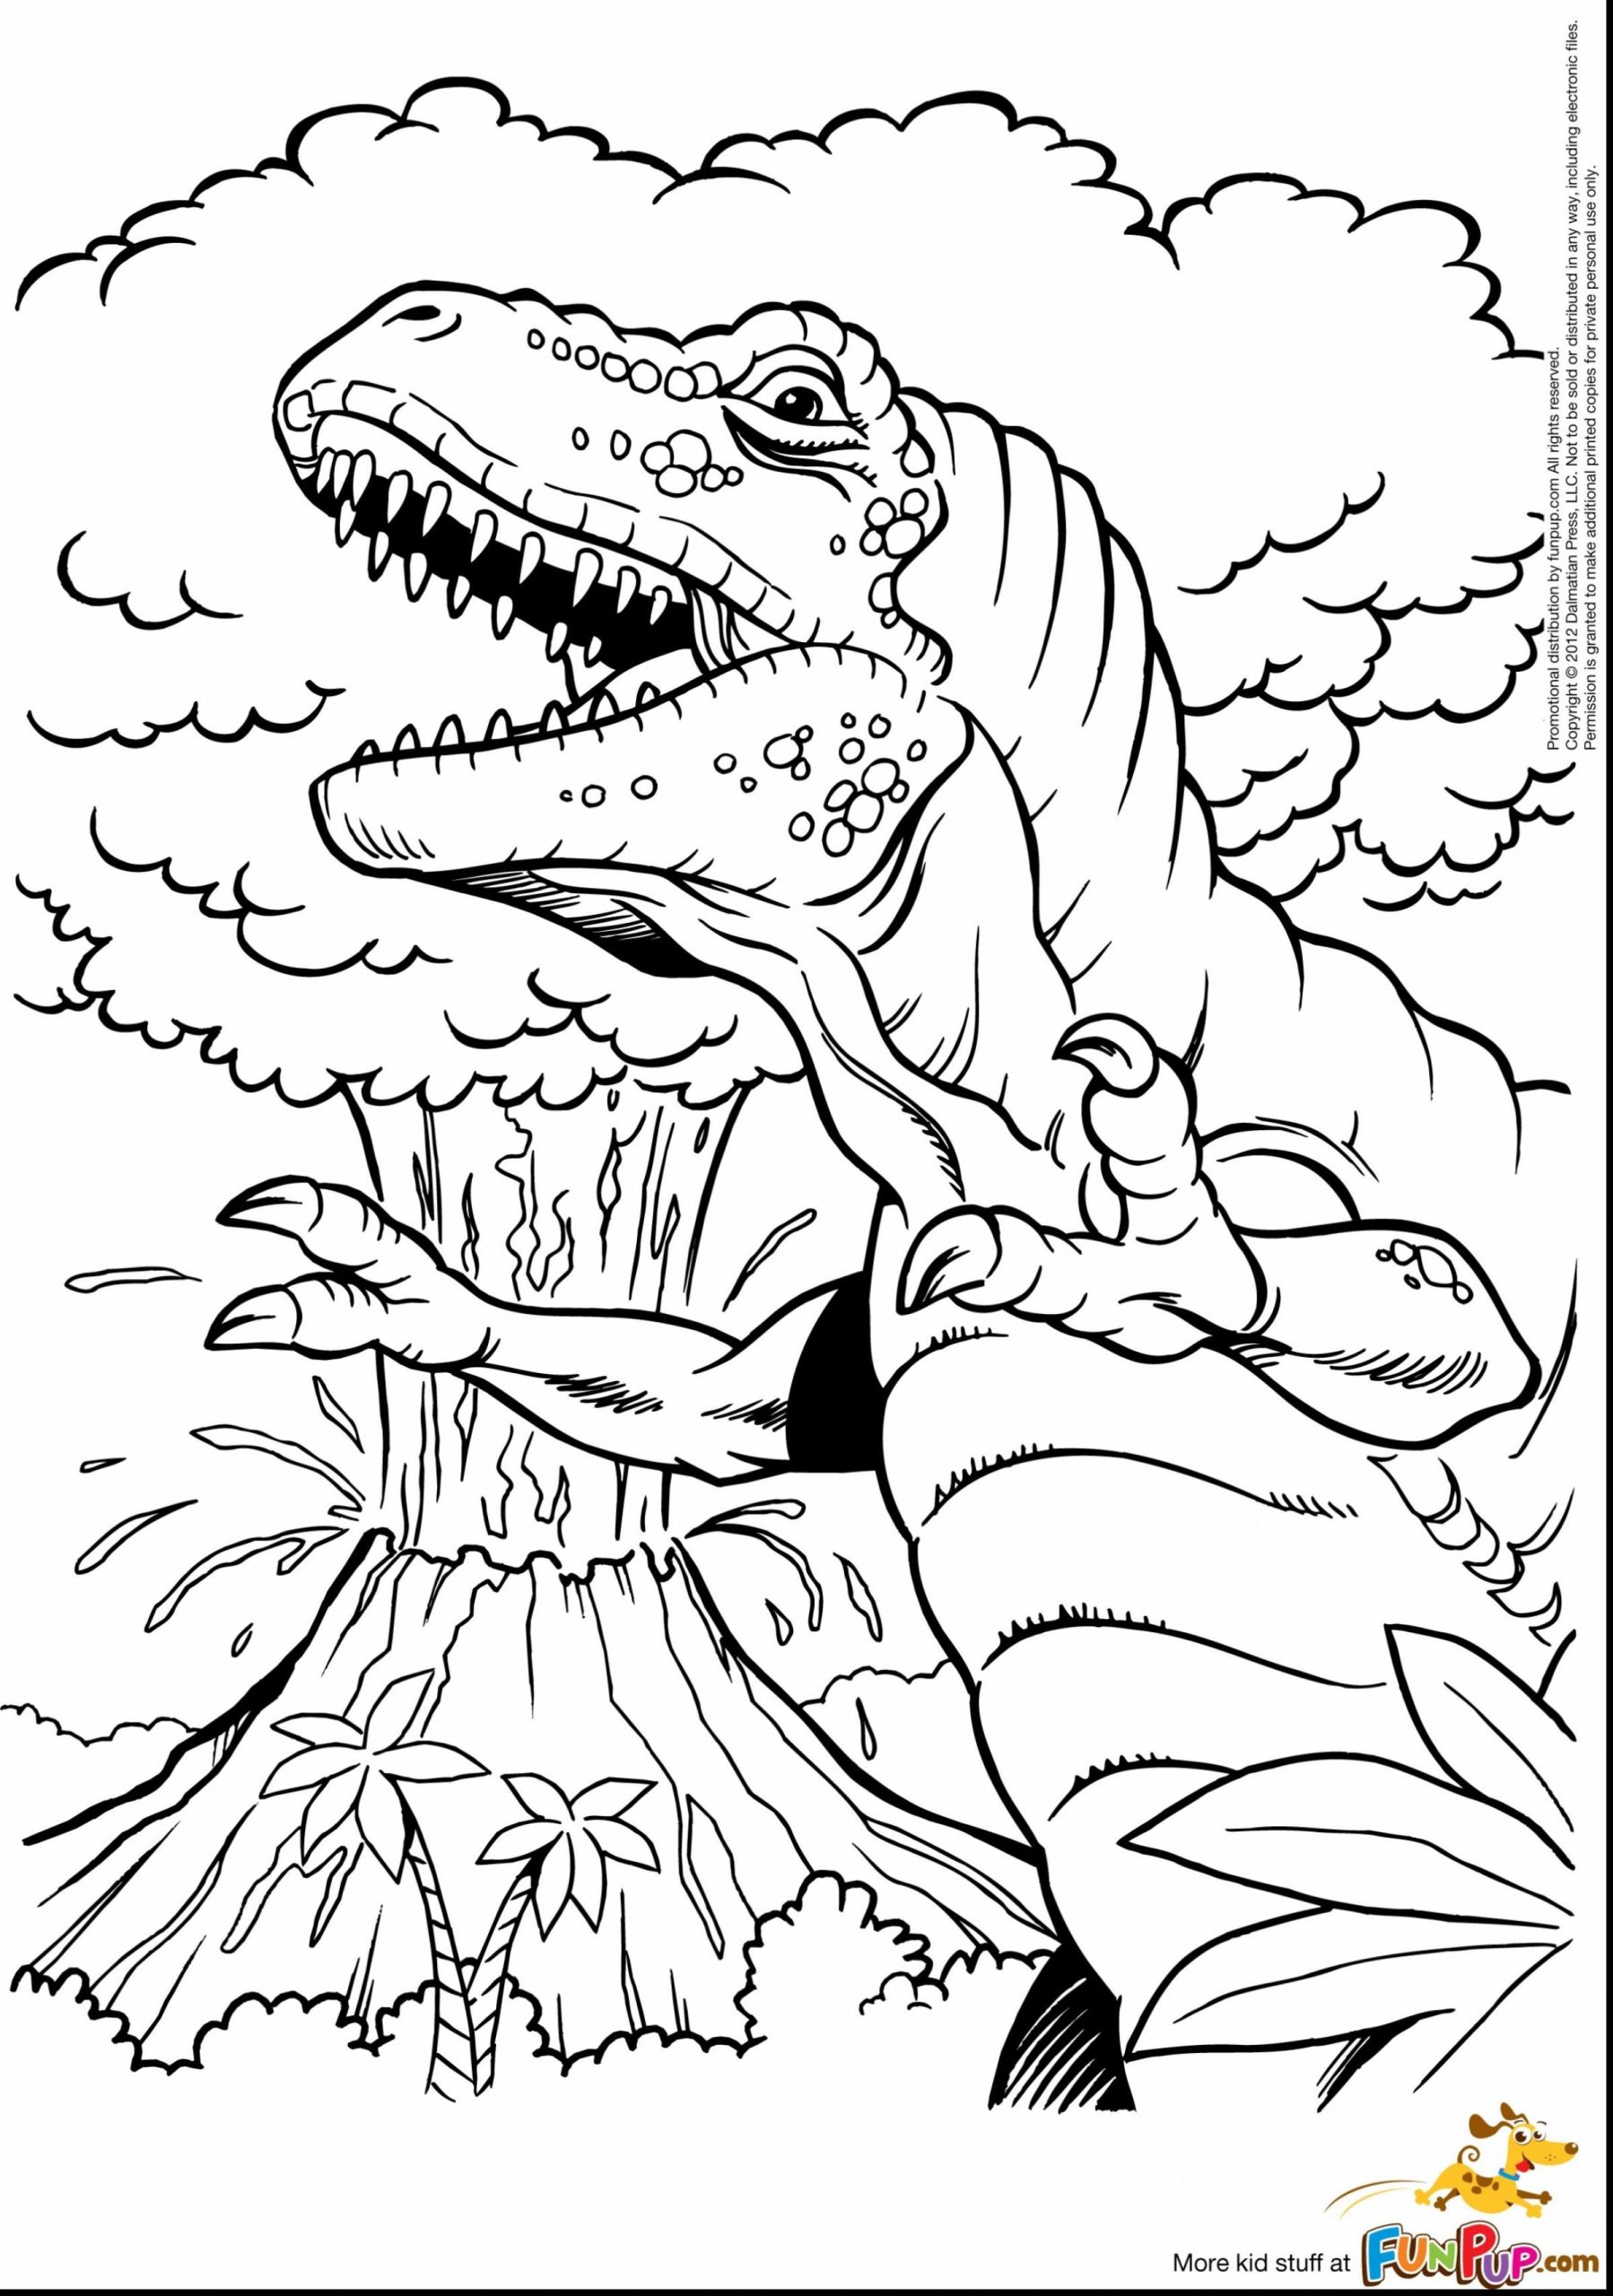 80 Printable Dinosaur Coloring Pages For Adults 2